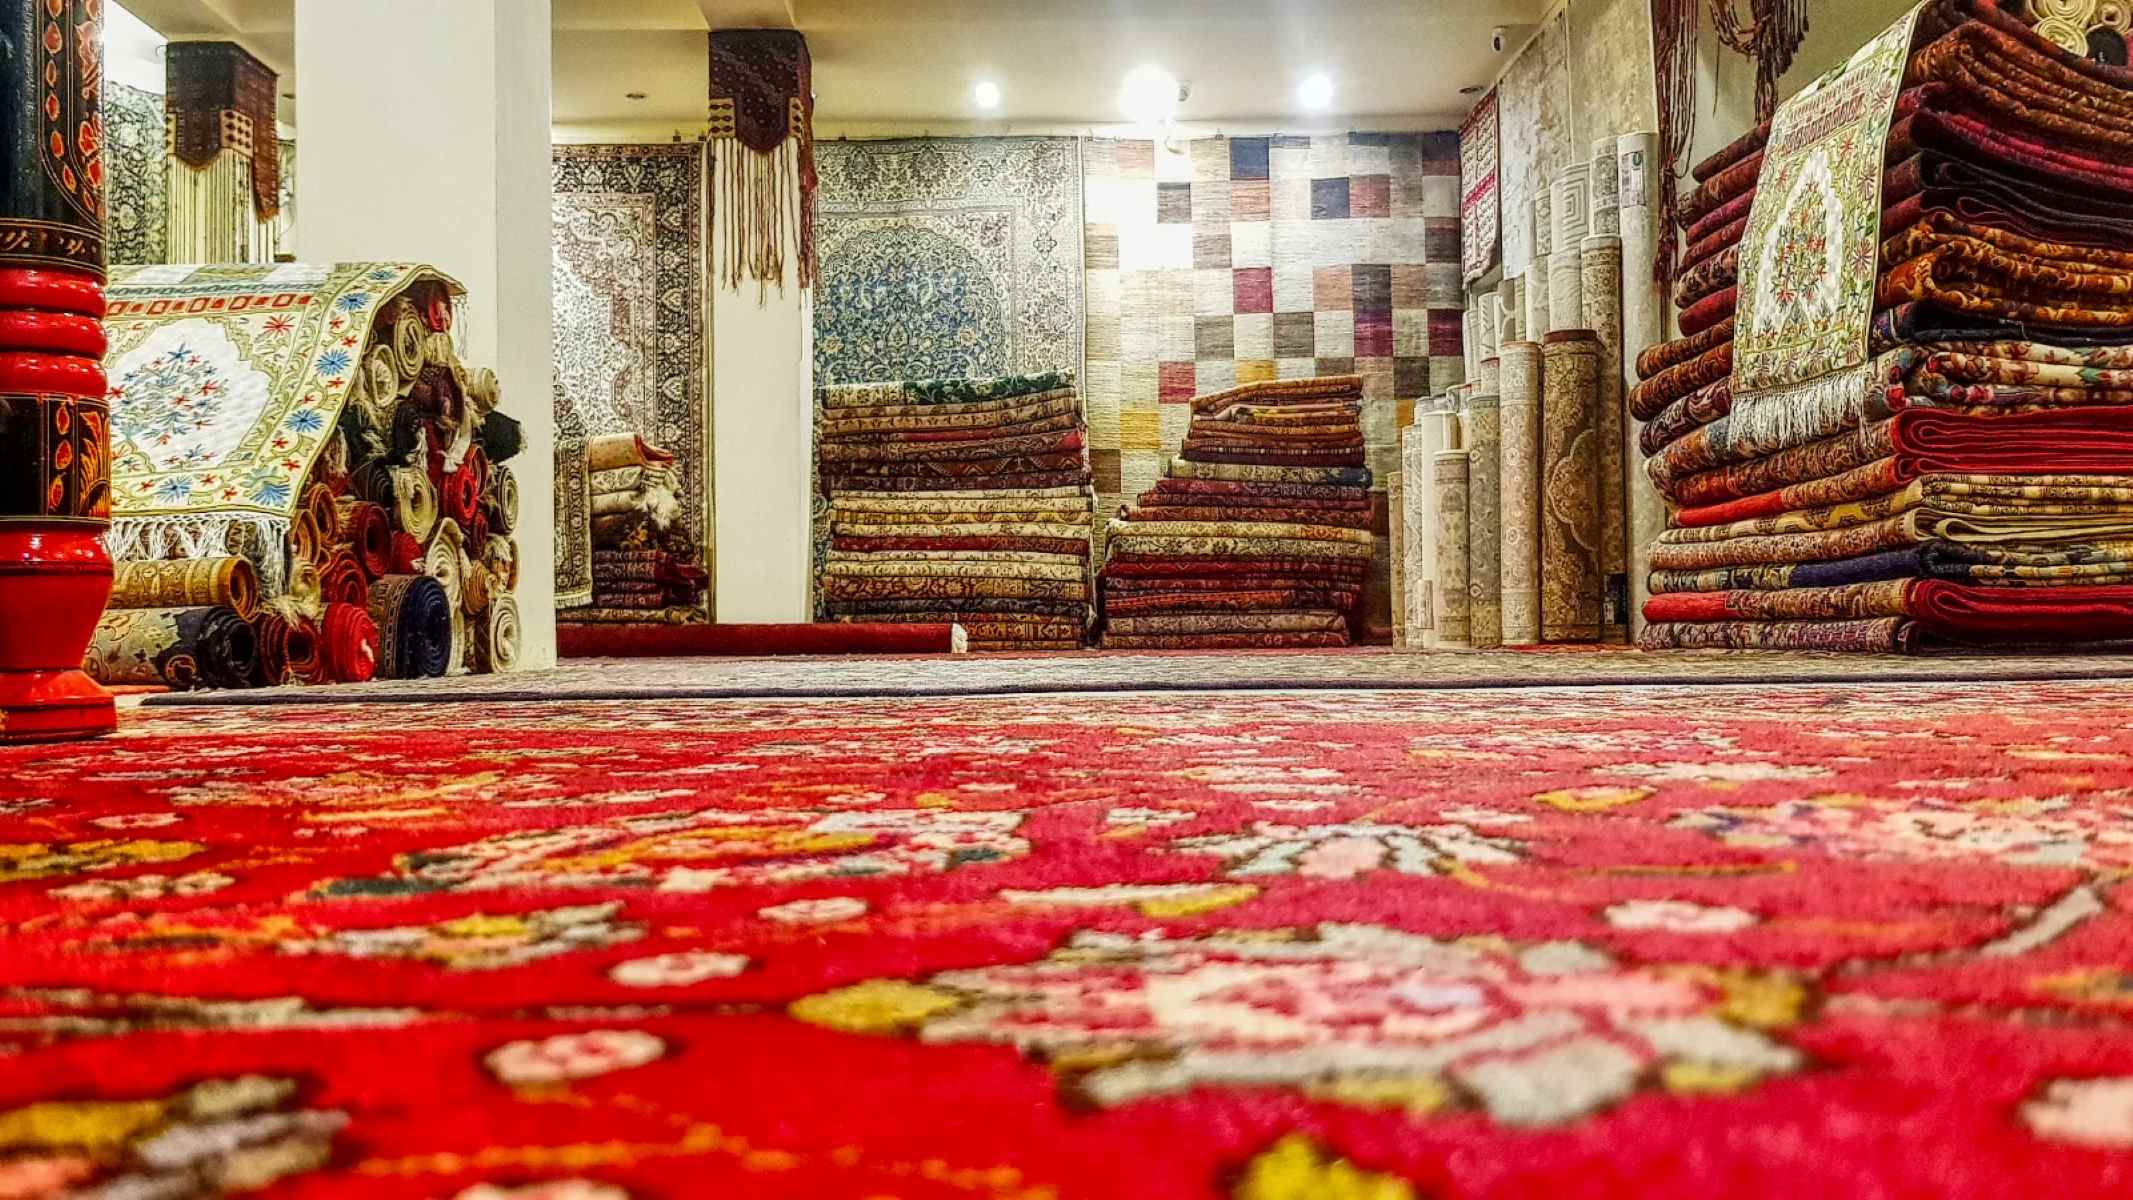 Discover The Most Unique Rugs And Carpets You’ve Ever Seen!